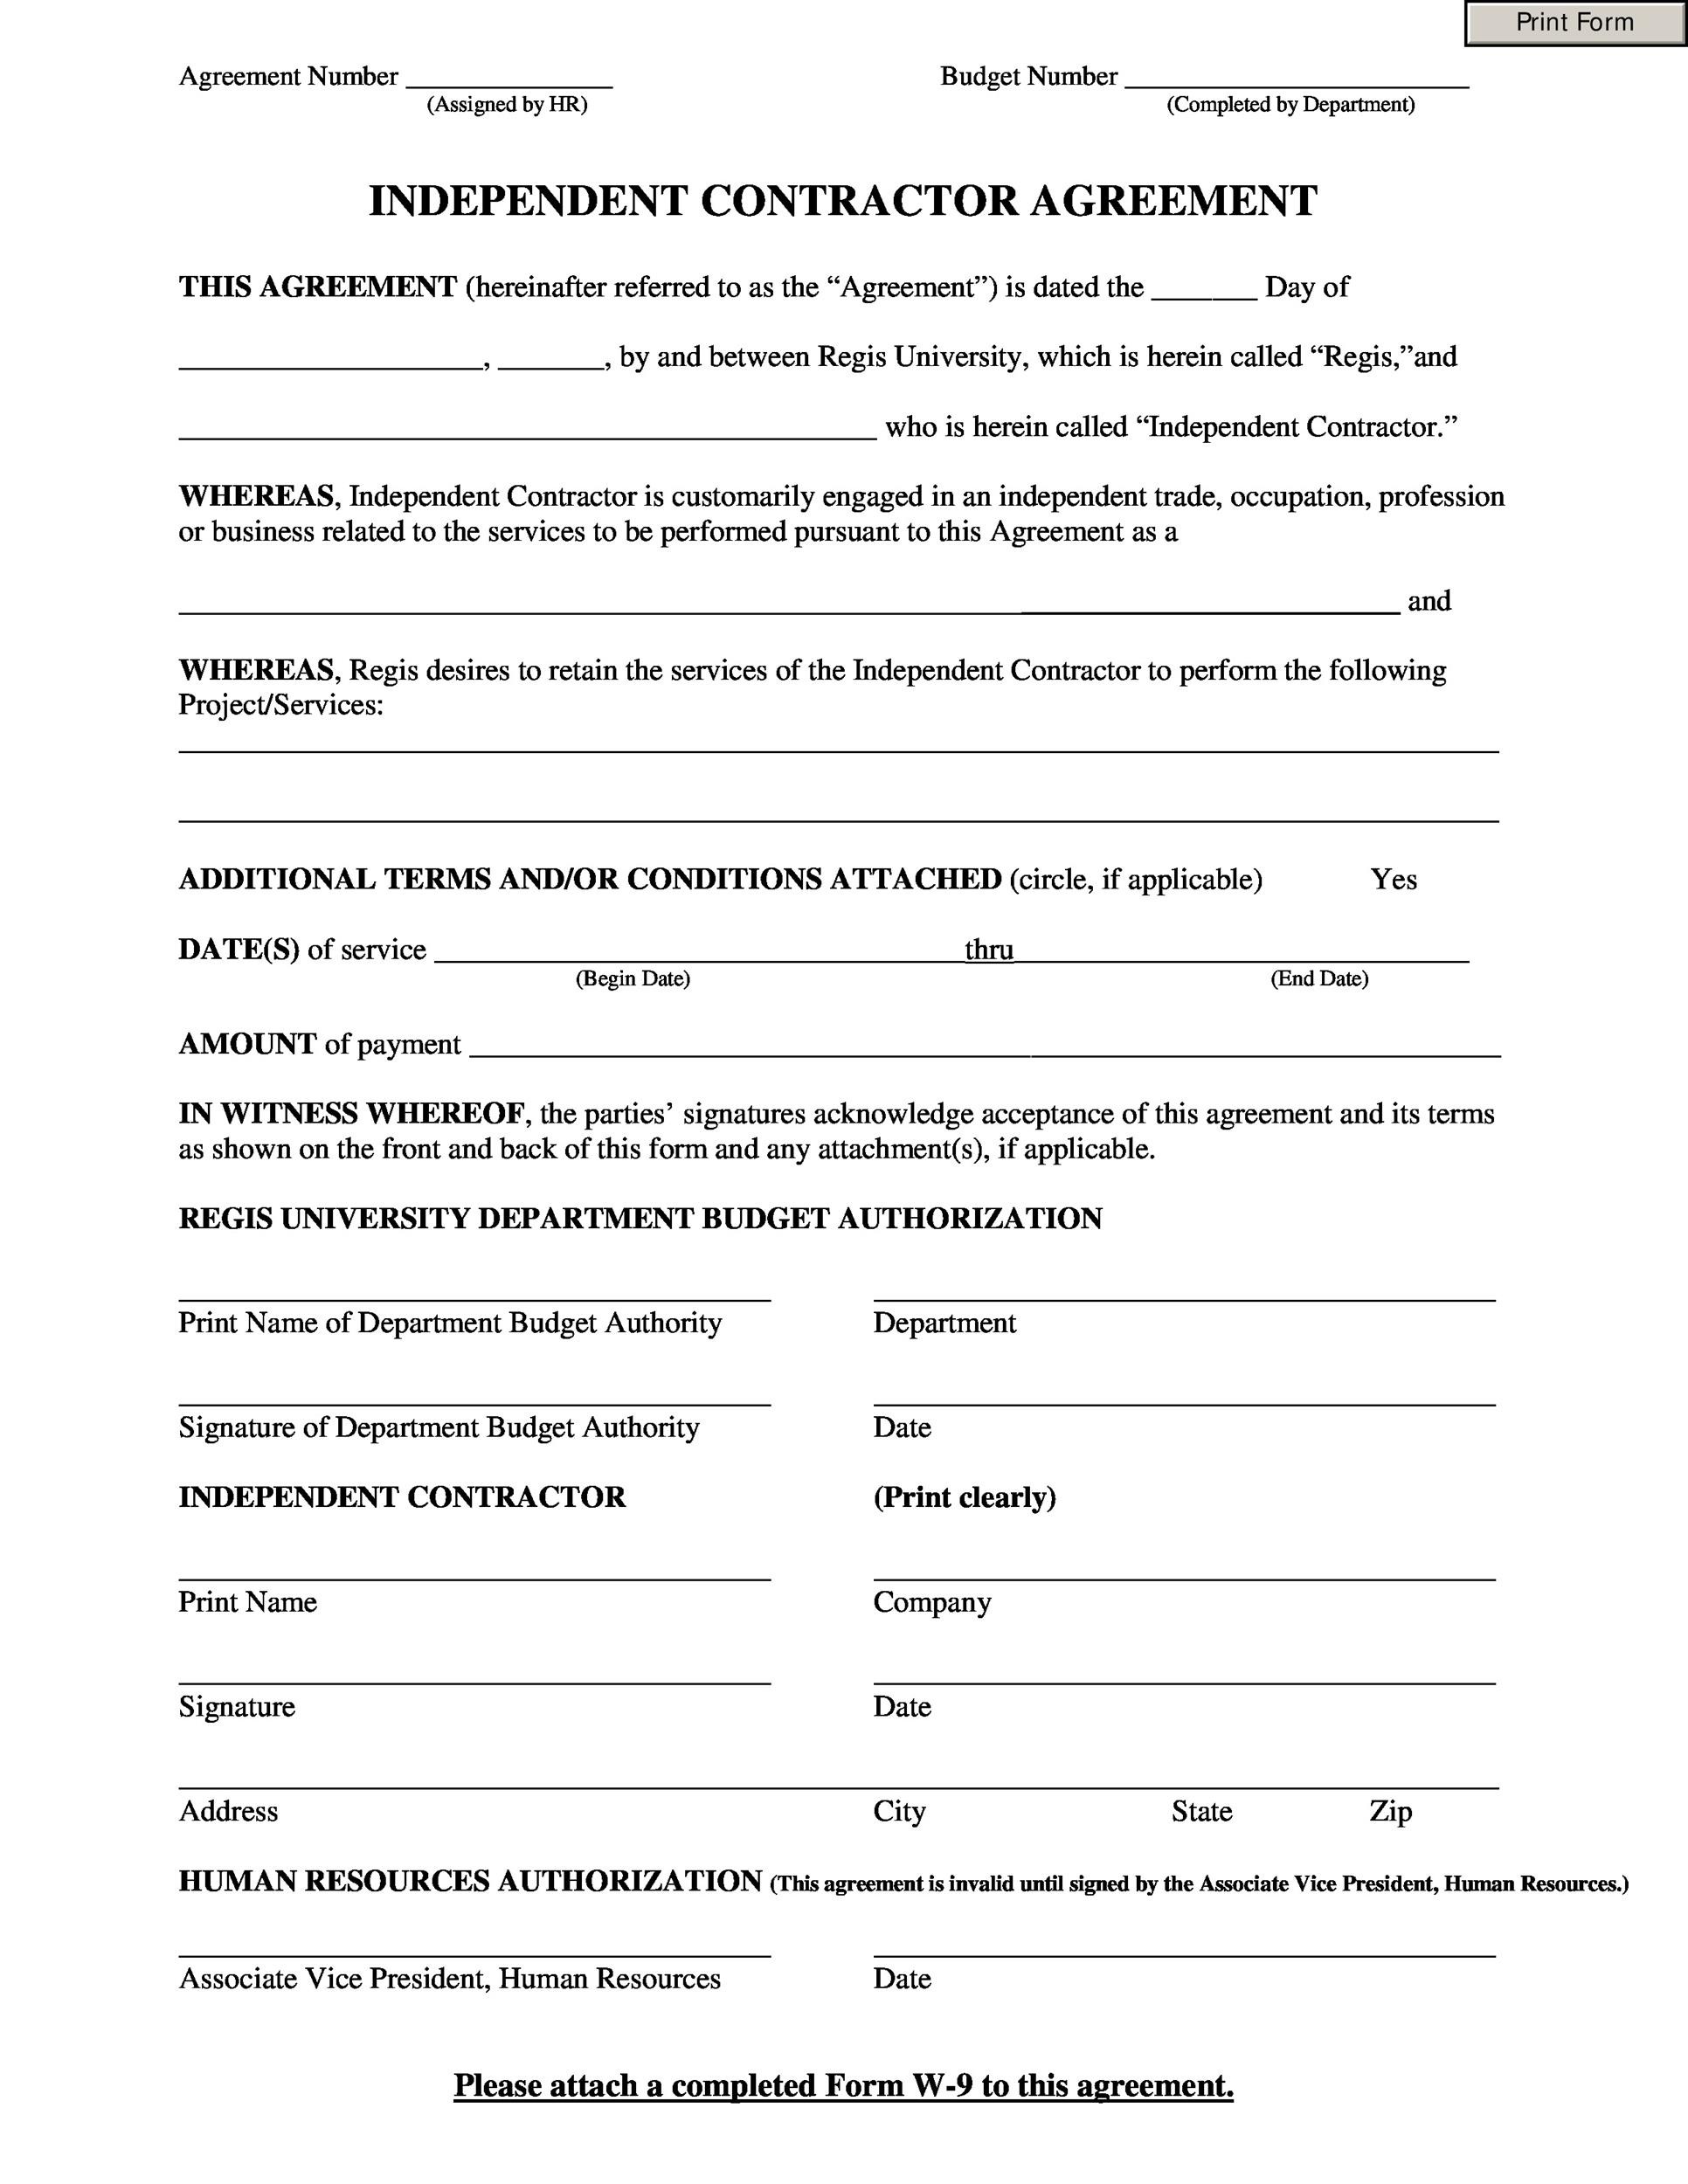 Independent Contractor Agreement Template Word Free Printable